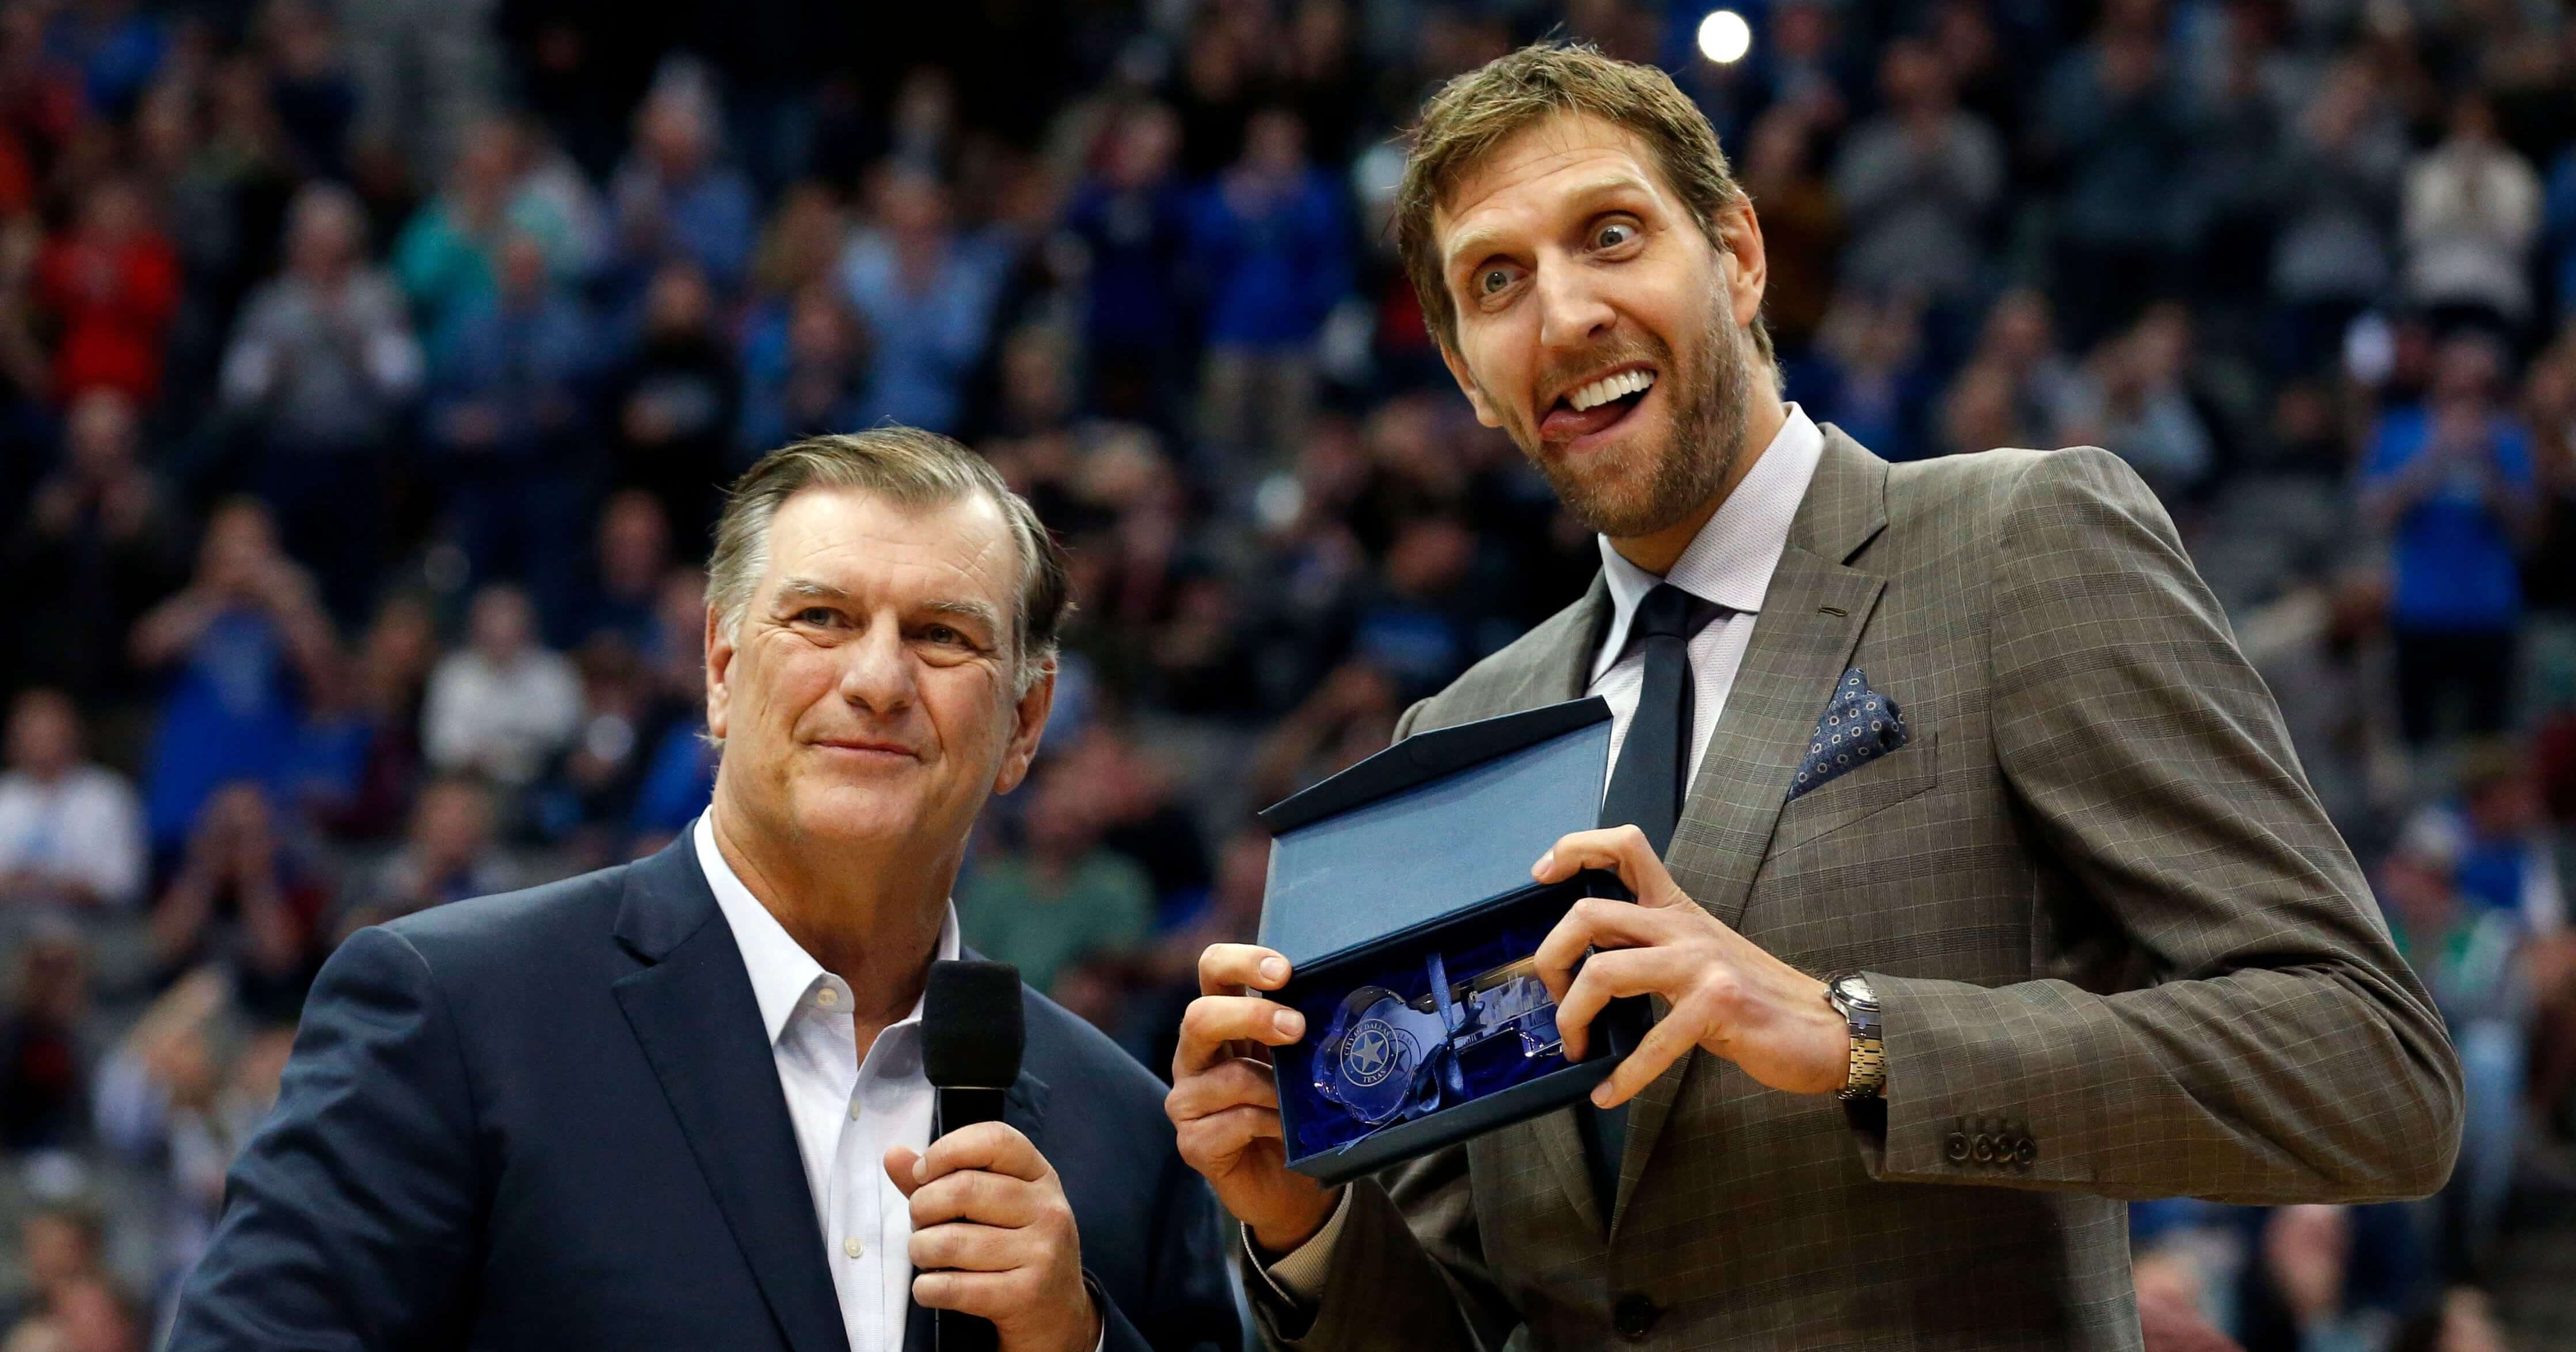 Dallas Mavericks player Dirk Nowitzki makes a face as he is presented with the key to the city of Dallas by Mayor Mike Rawlings, left, during halftime of the Mavs' game against the Brooklyn Nets on Wednesday.